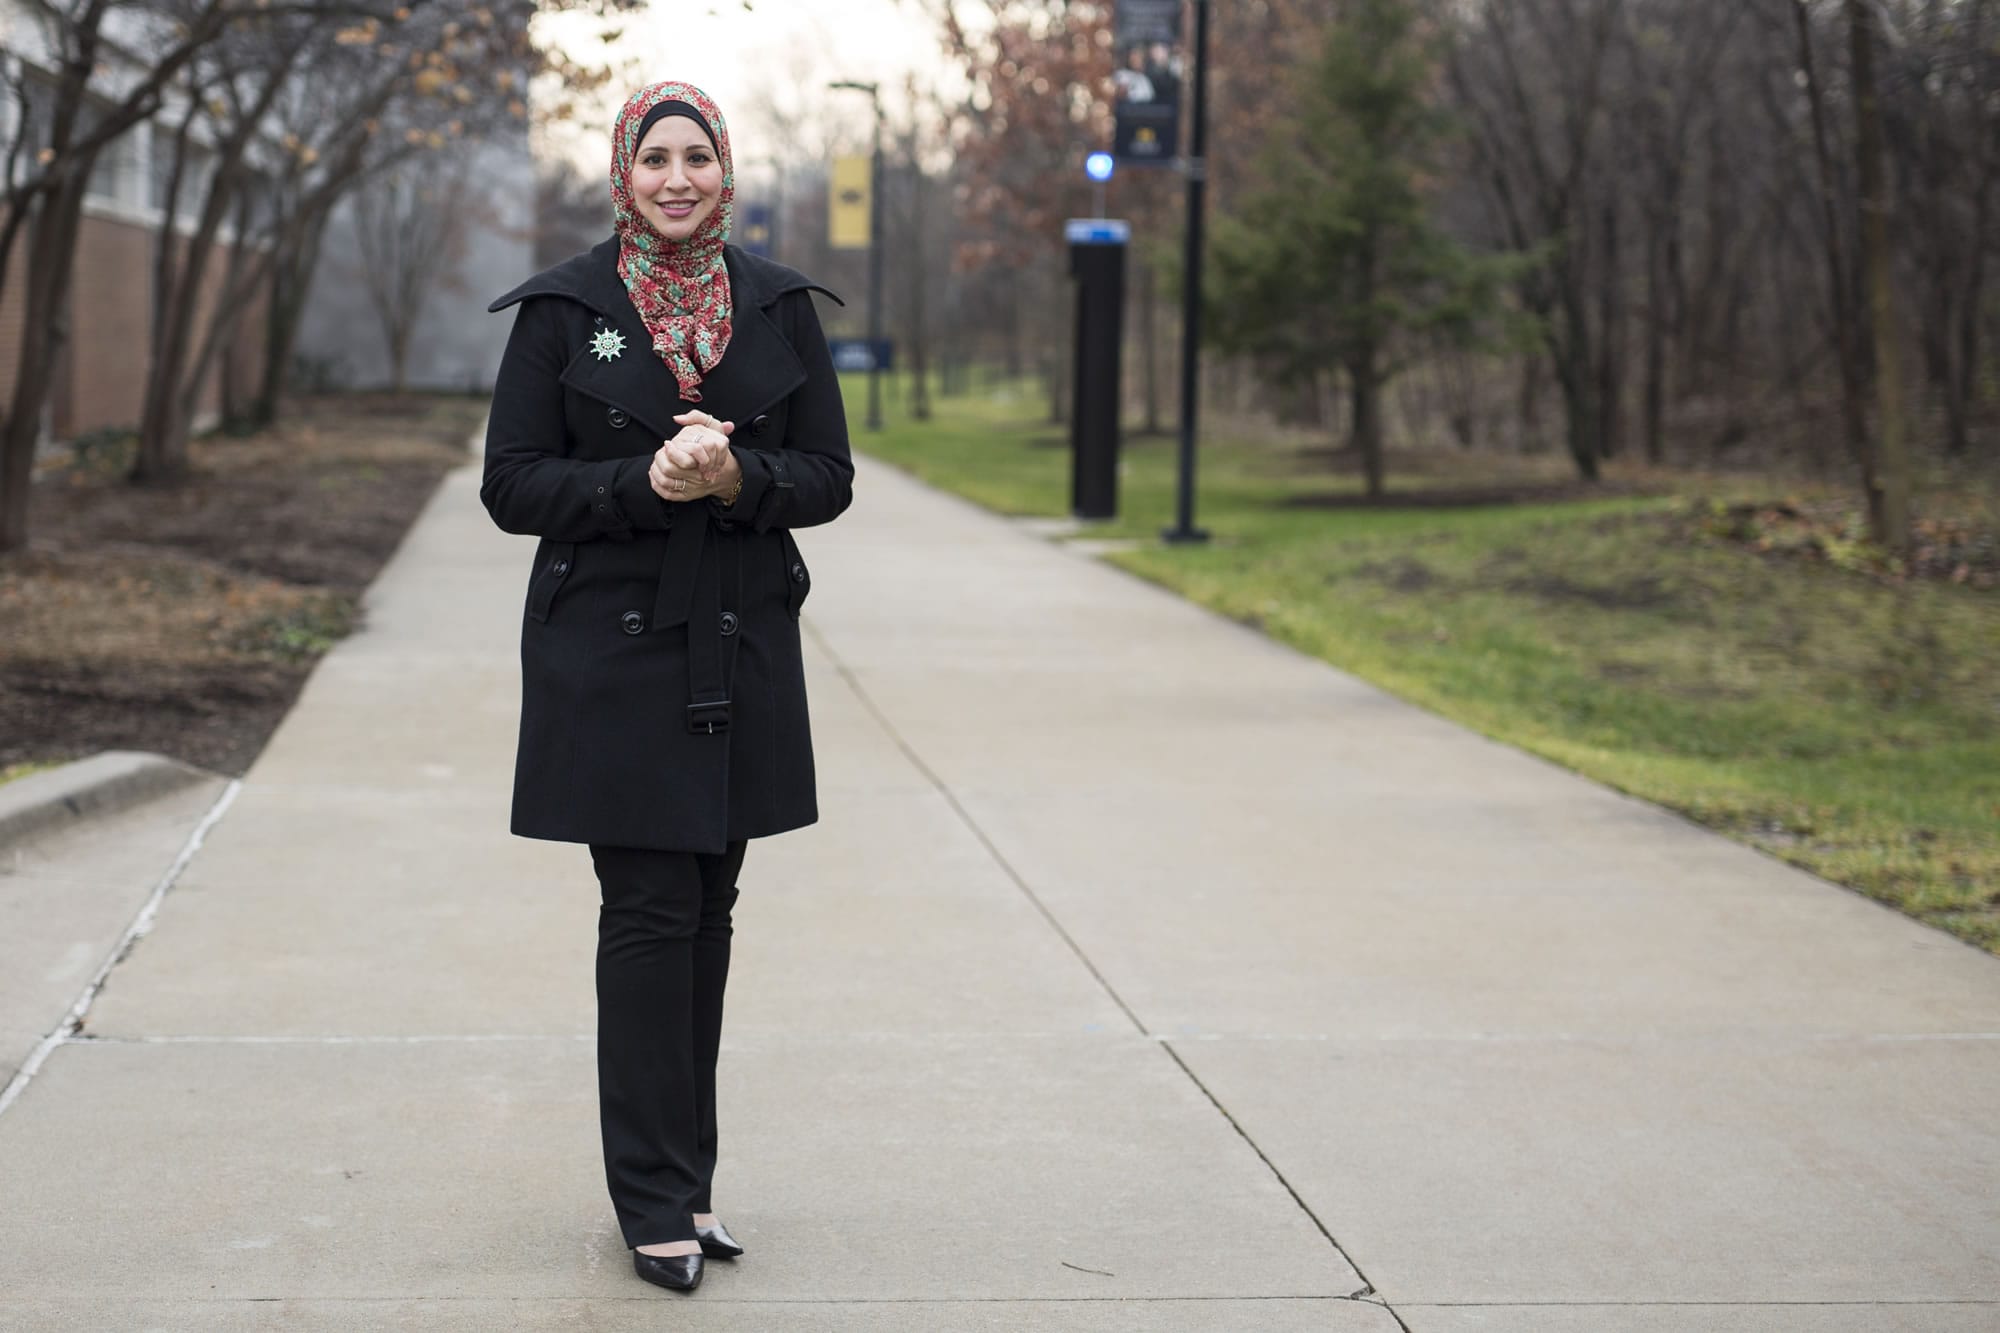 Suehaila Amen, coordinator of International Admissions and Recruitment at the University of Michigan Dearborn, is seen on campus Thursday in Dearborn, Mich. Amid the high level of harassment, threats and vandalism directed at American Muslims and at mosques, Muslim women are intensely debating the duty and risks related to wearing their head-coverings as usual.